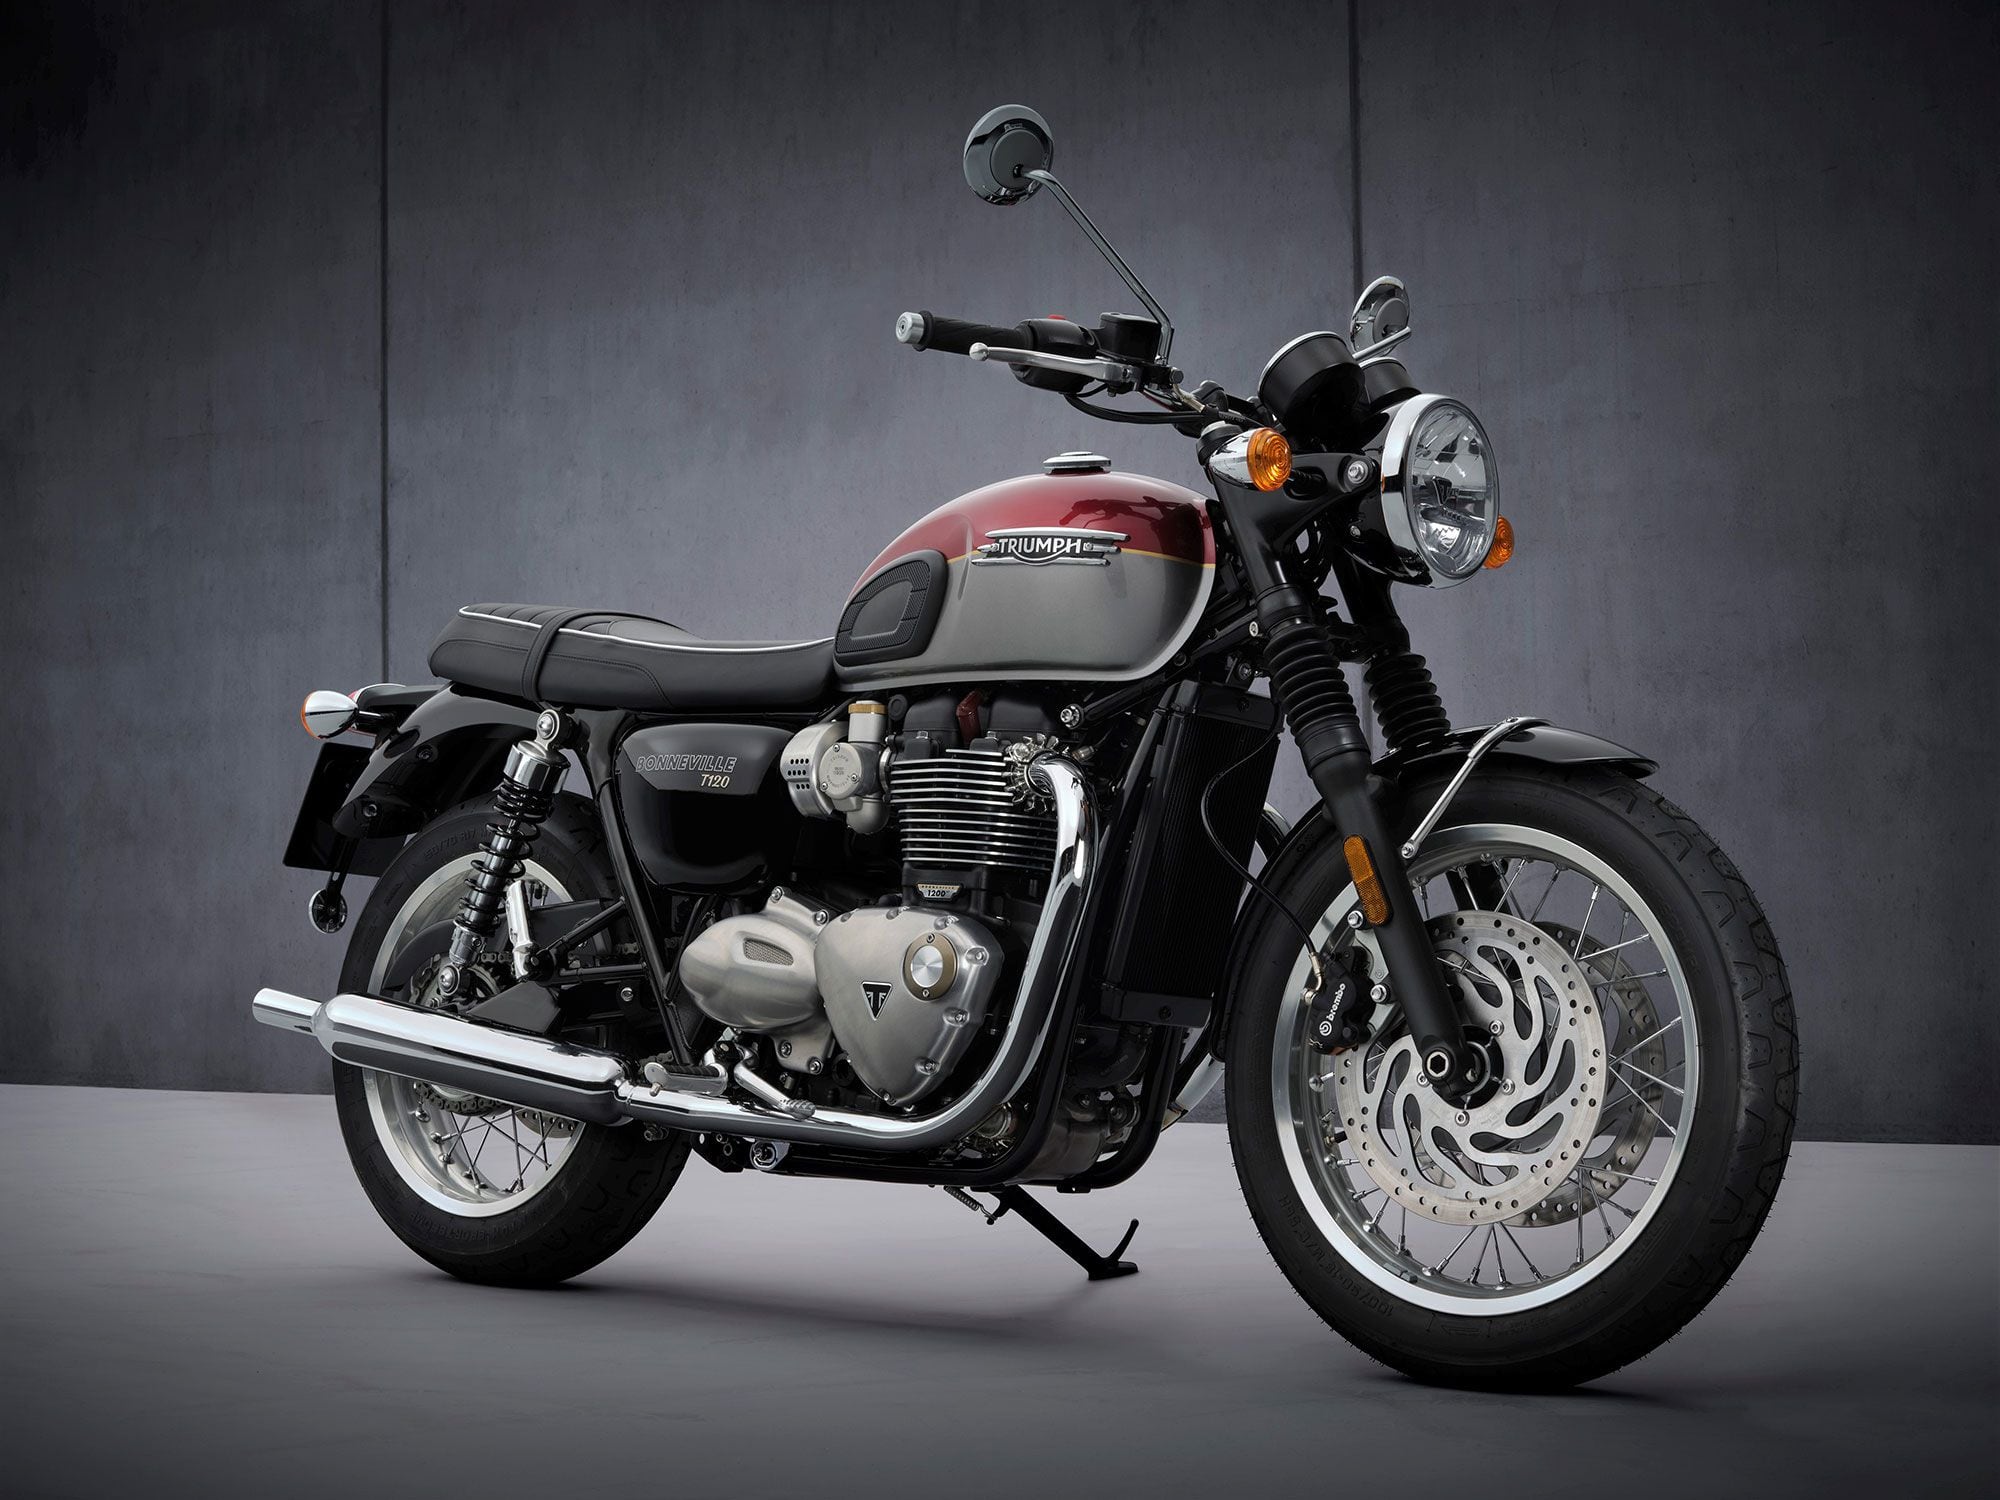 Less weight, more responsiveness, and better brakes mark the highlights for the T120.